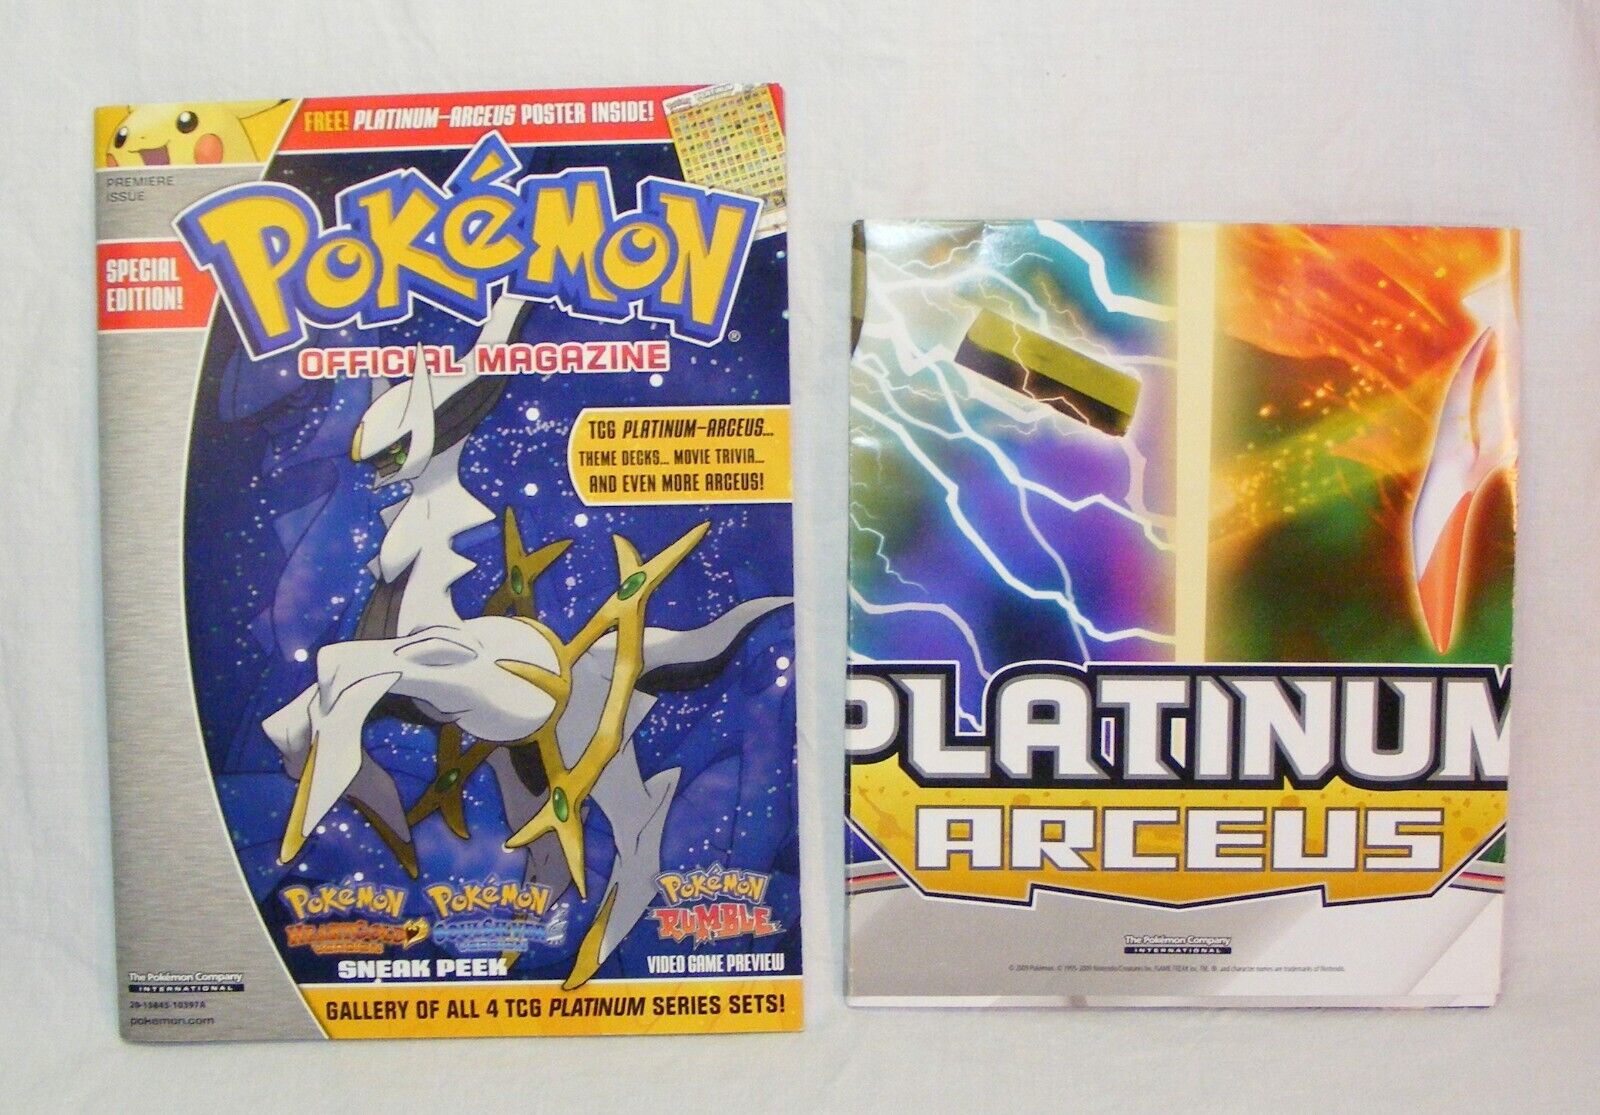 Pokemon Official Magazine Premiere Issue with Arceus poster no booster pack 2009